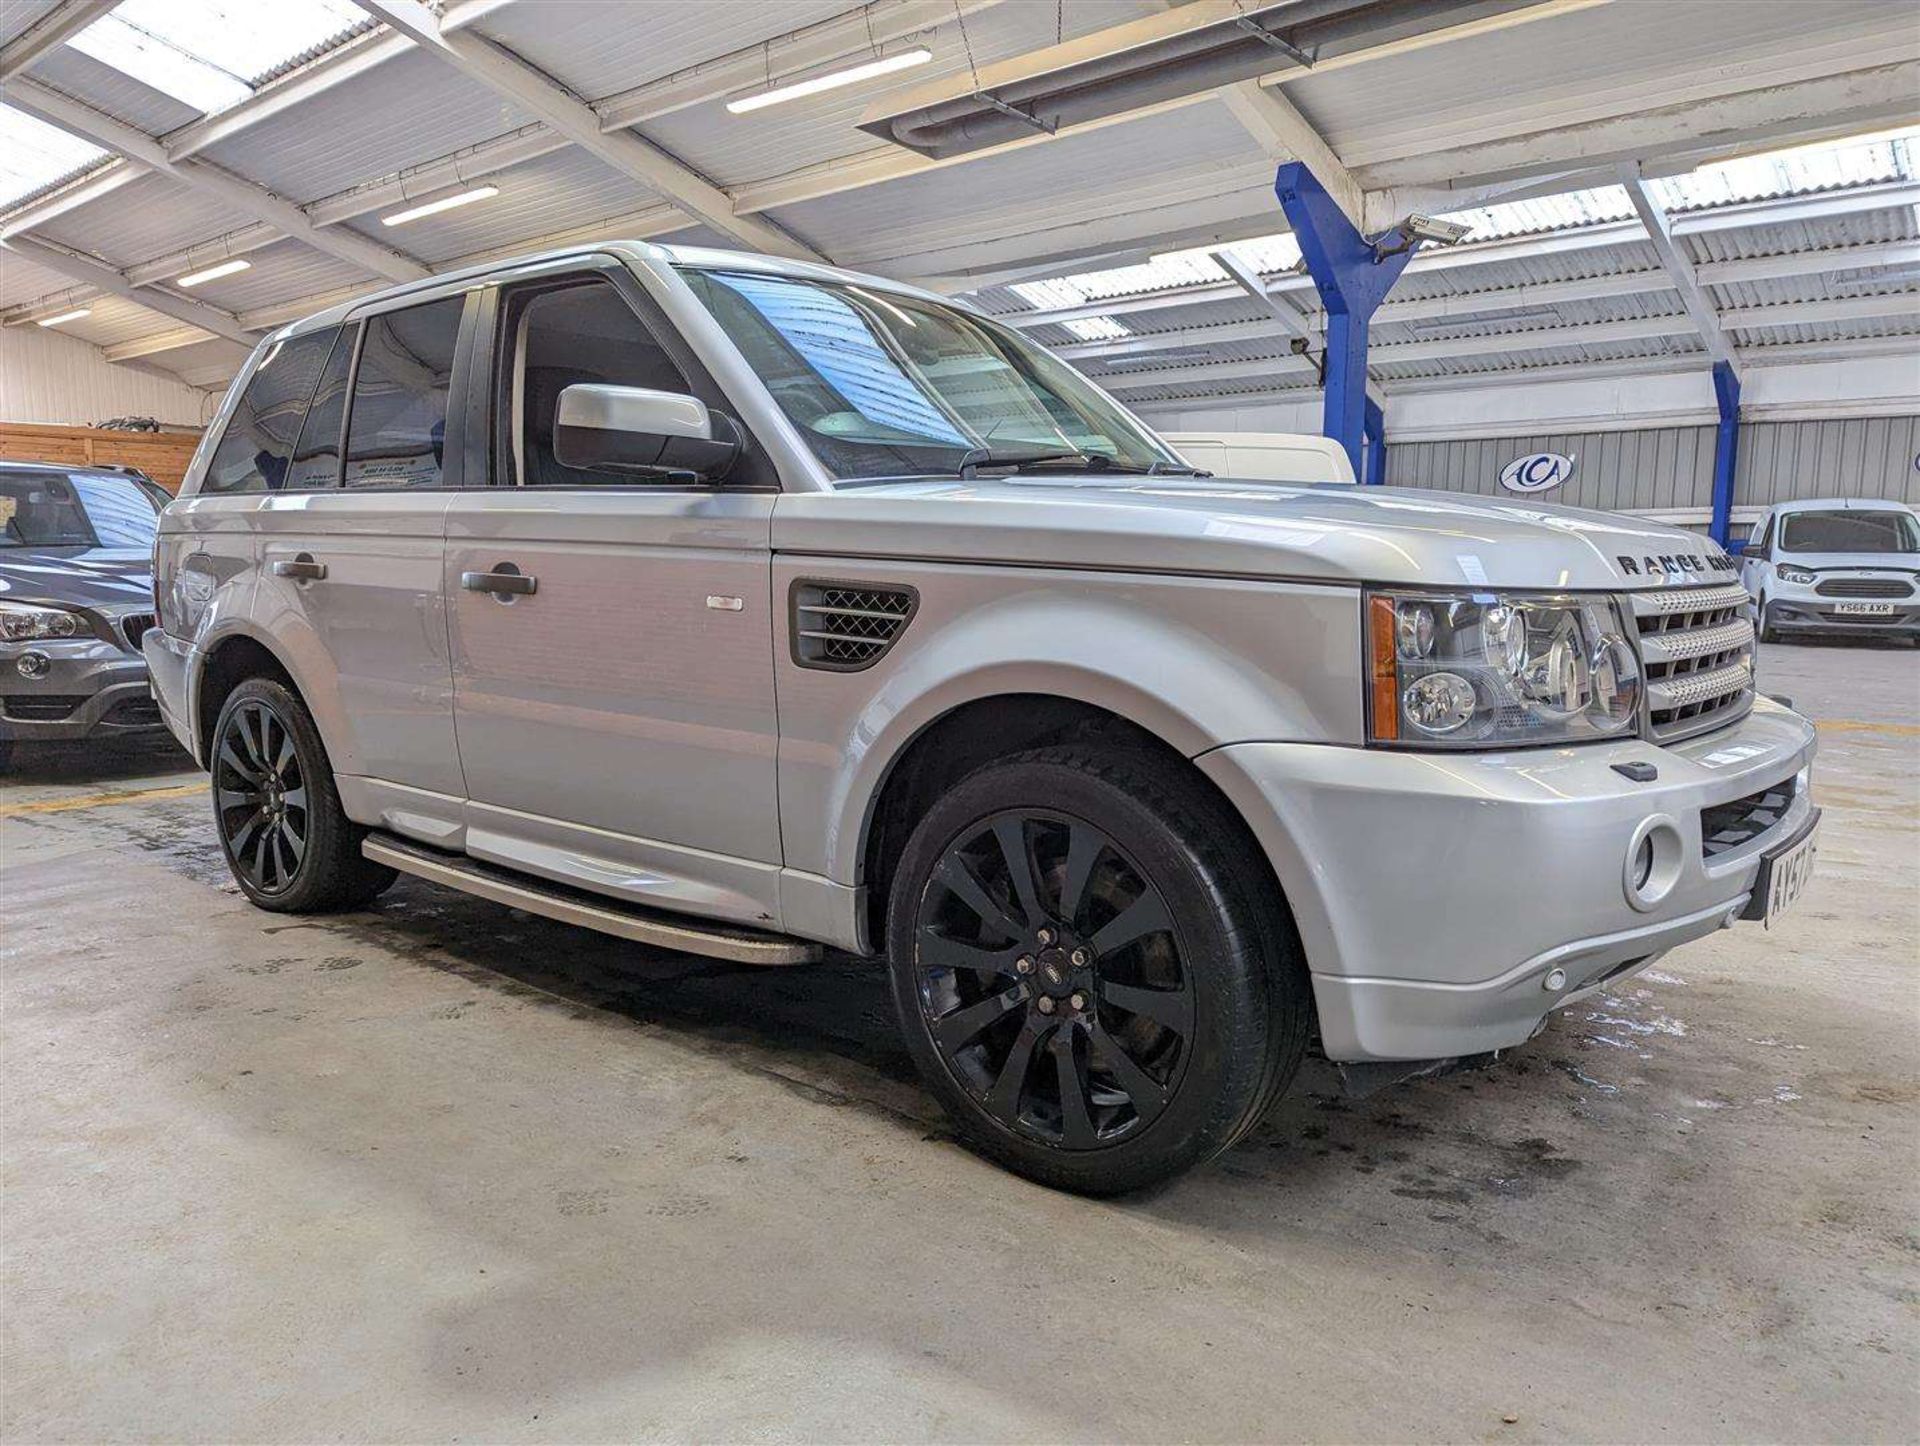 2007 LAND ROVER RANGE ROVER SP HSE TDV8 AUTO - Image 11 of 29